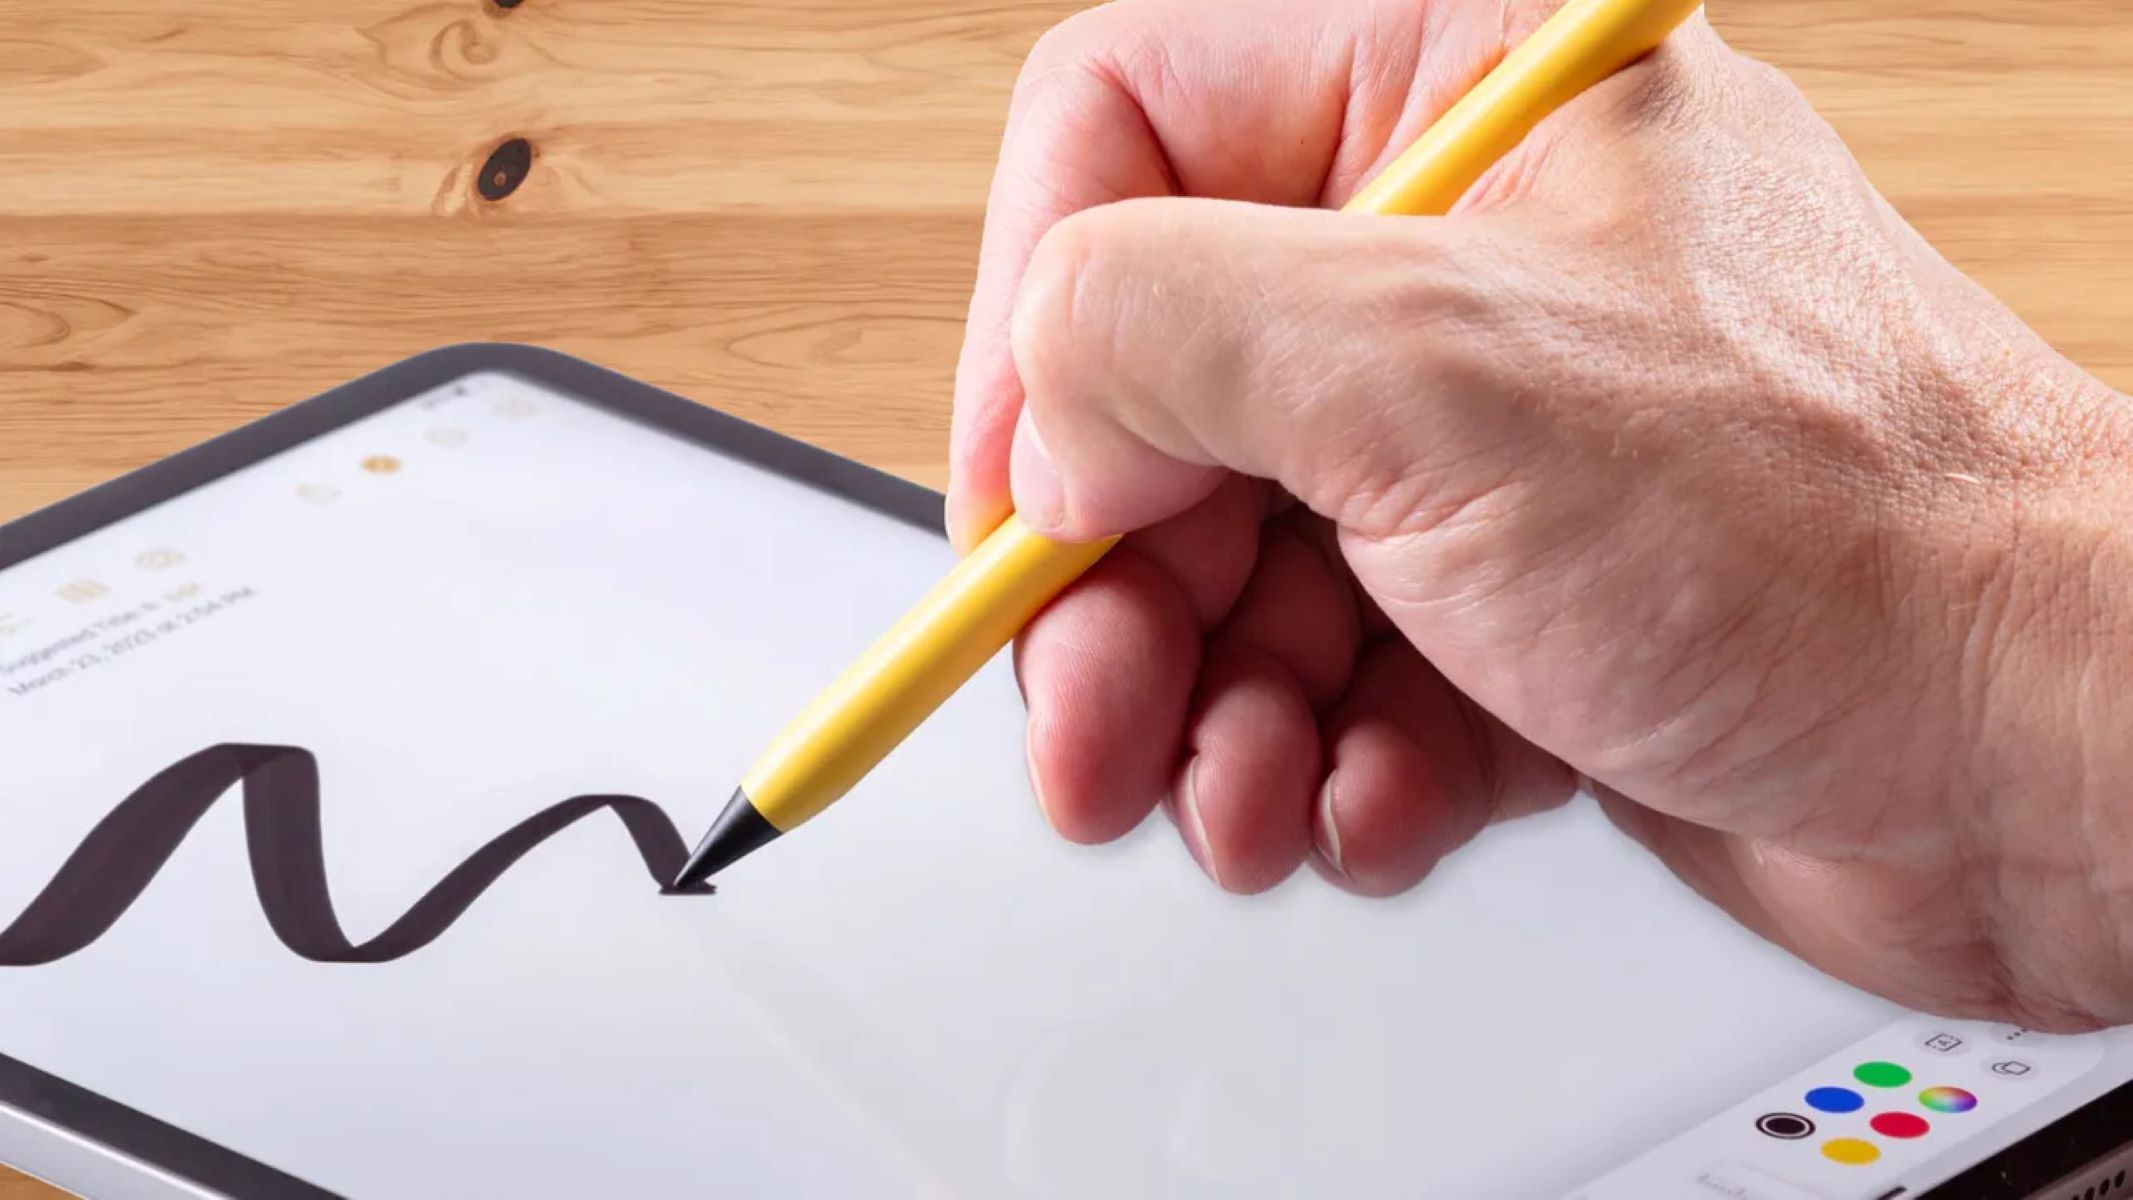 Removing The Stylus Protector: Quick Tips